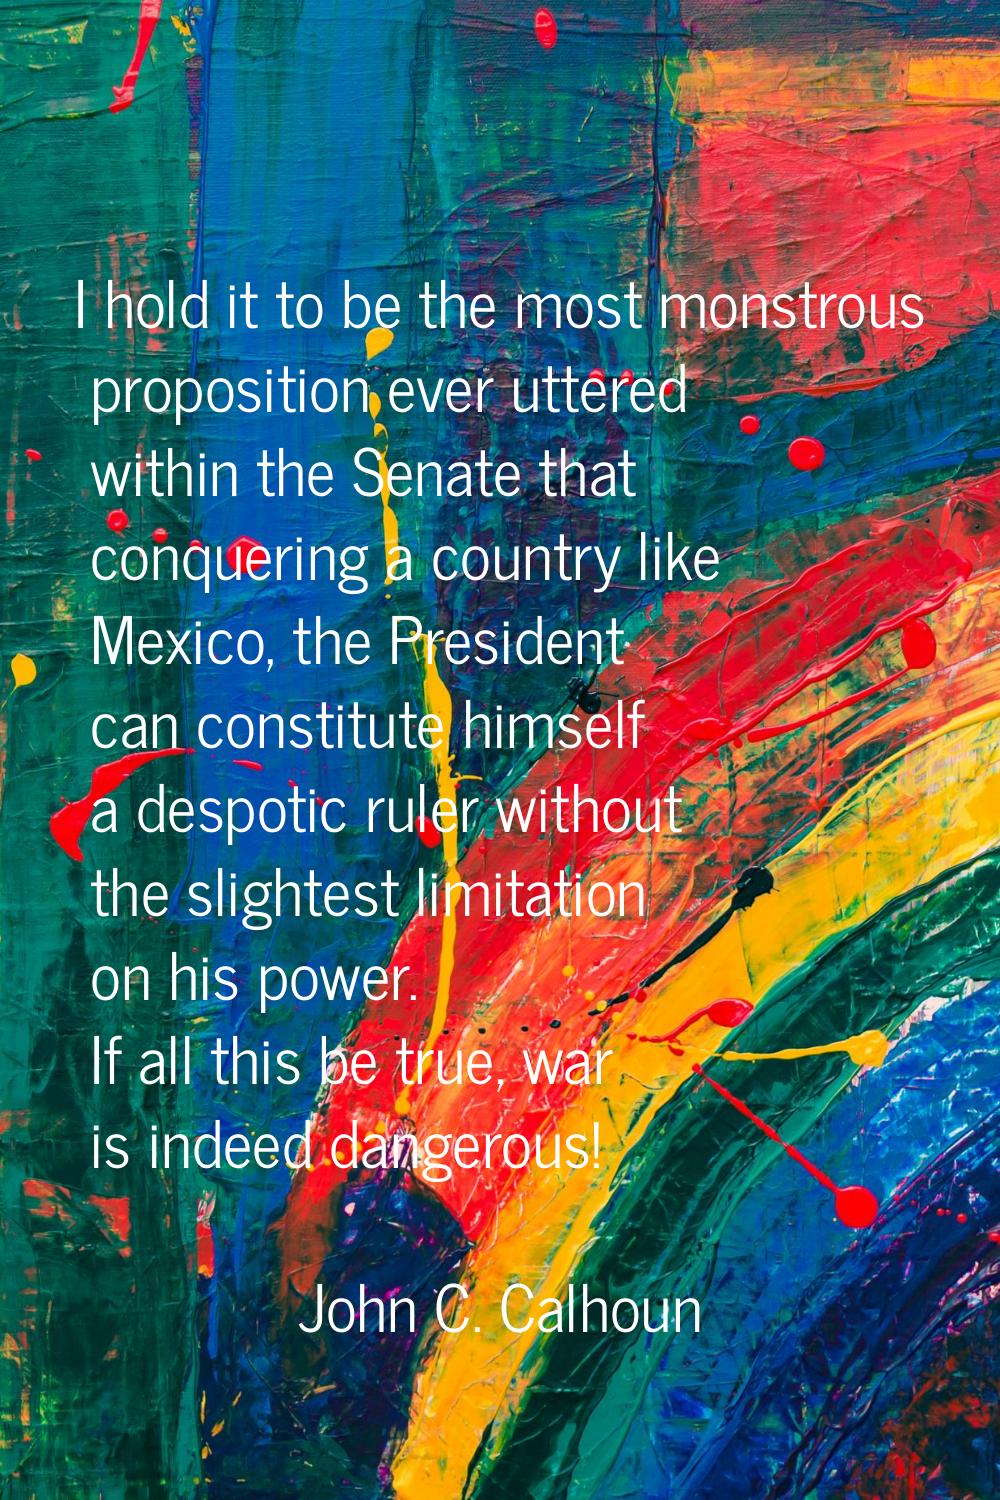 I hold it to be the most monstrous proposition ever uttered within the Senate that conquering a cou